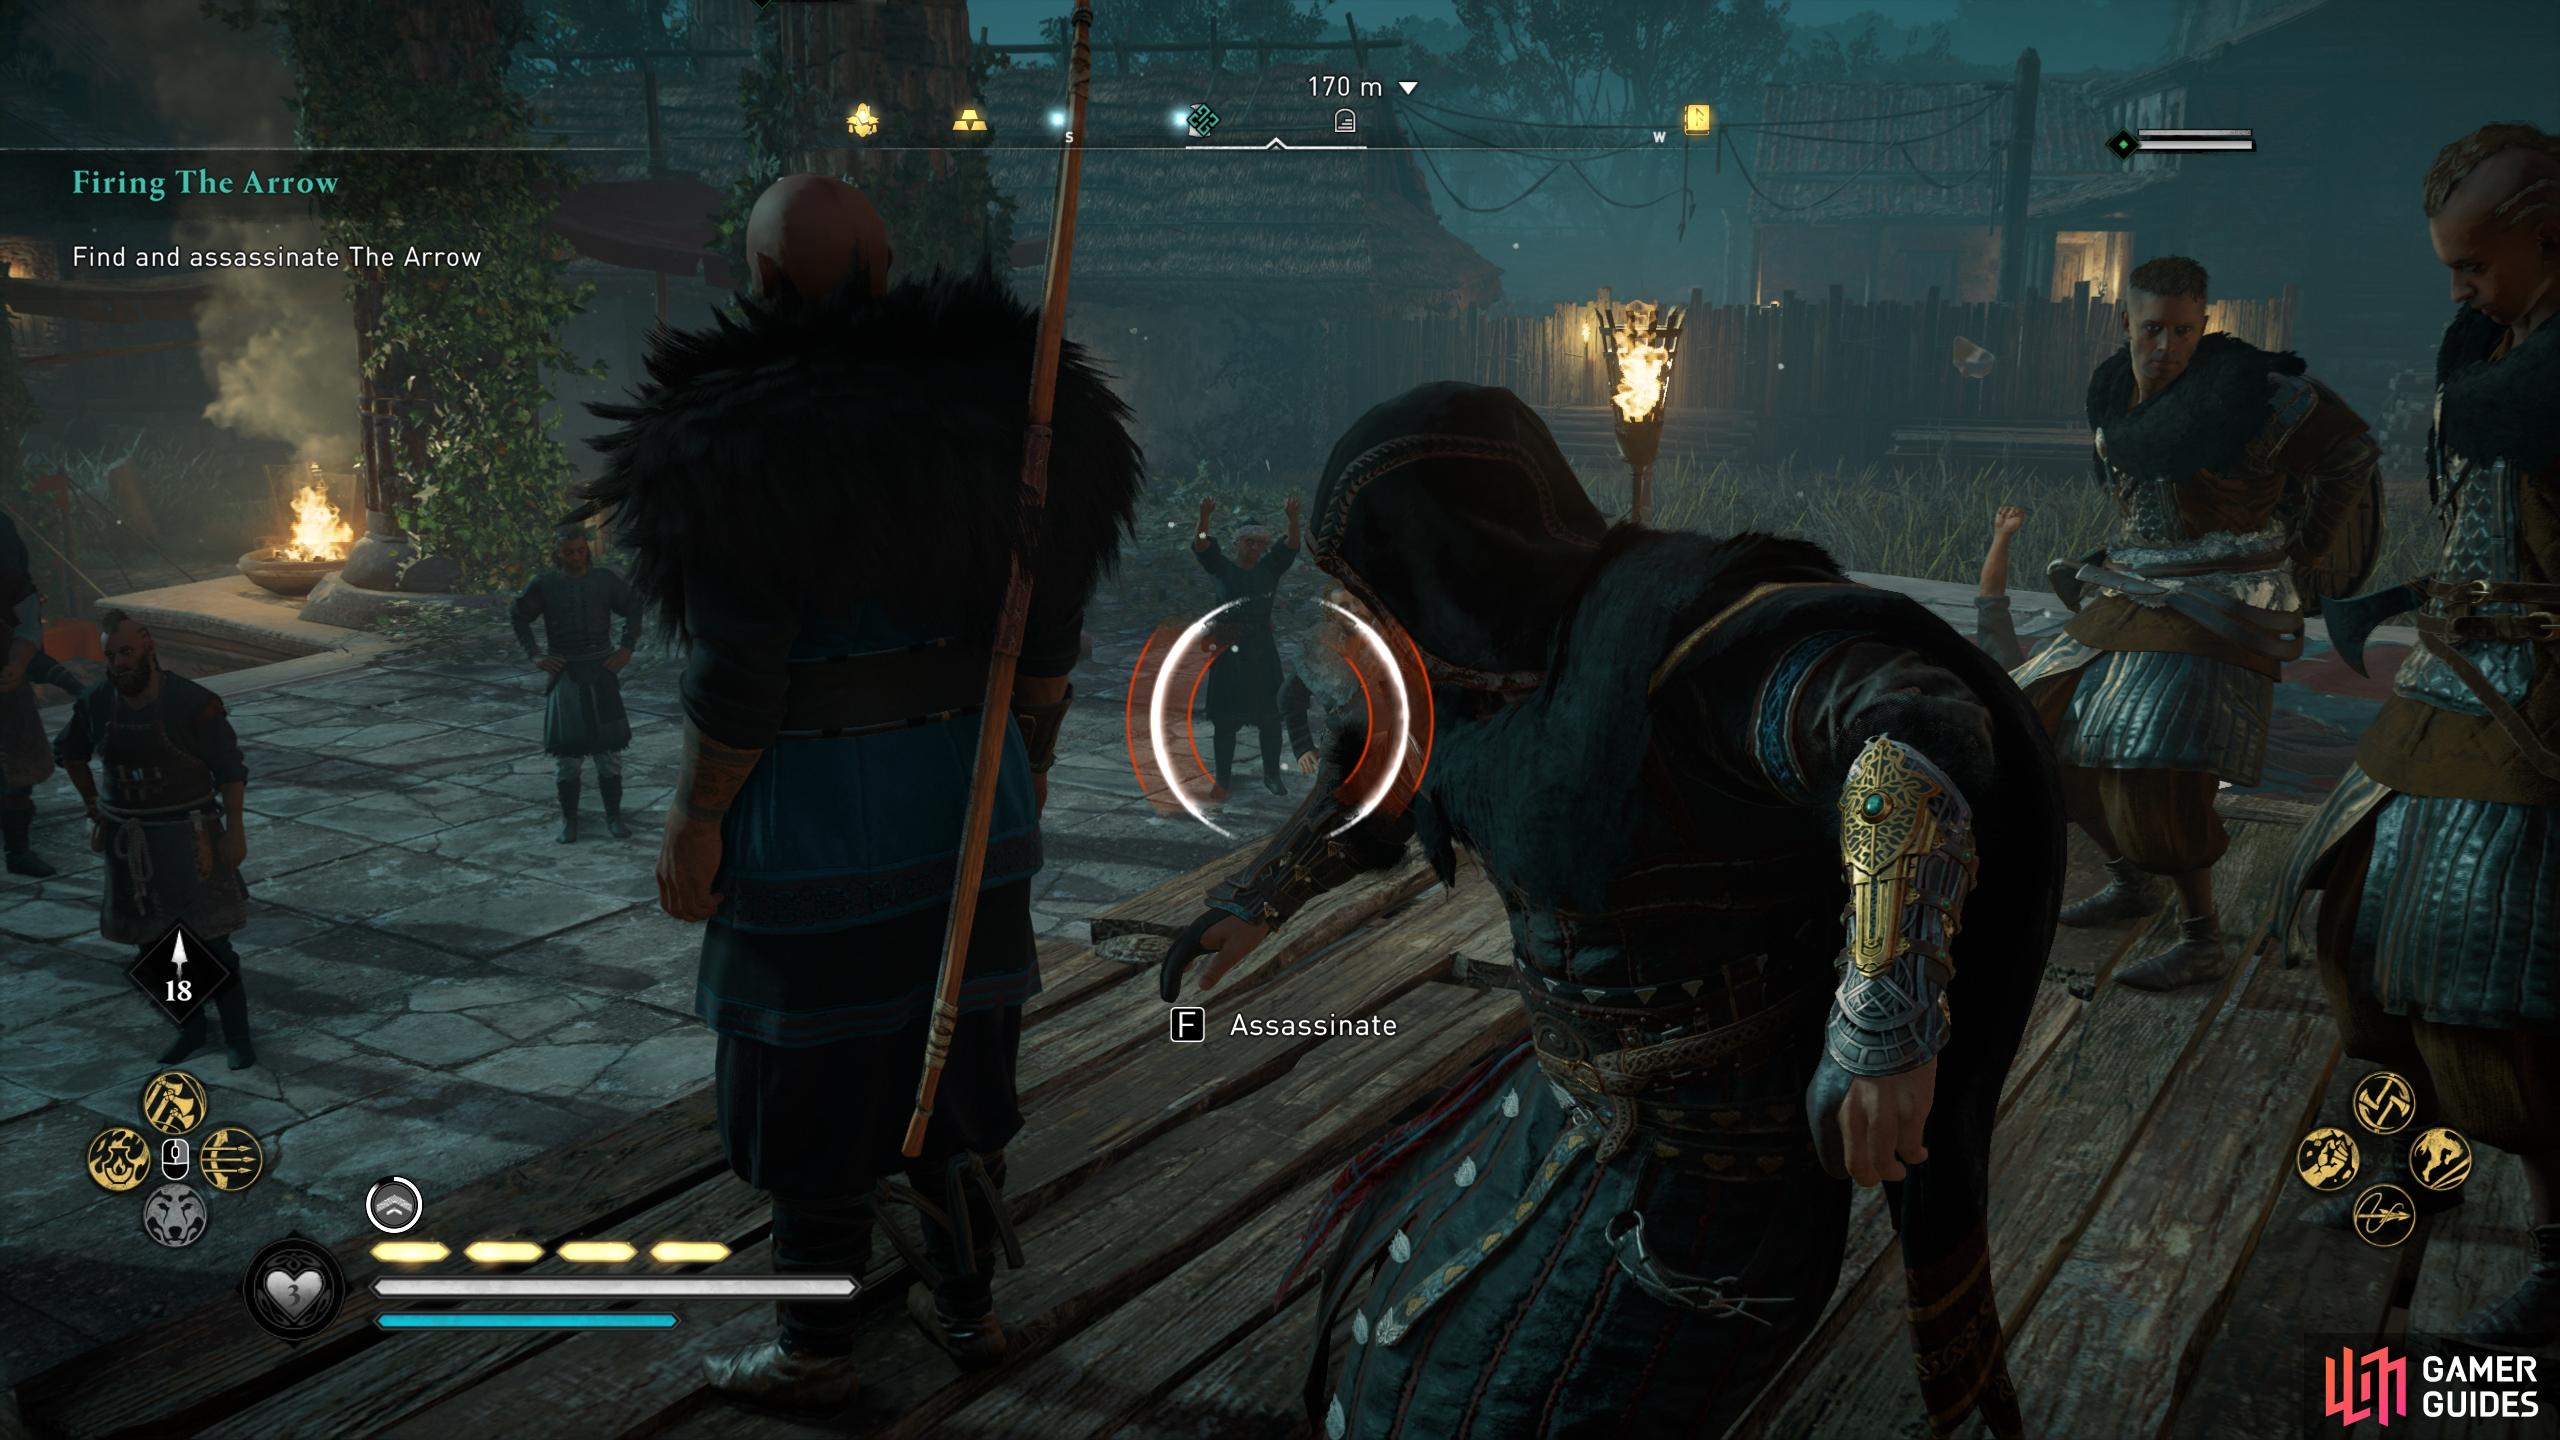 With the Advanced Assassination skill, you can kill The Arrow in one hit.